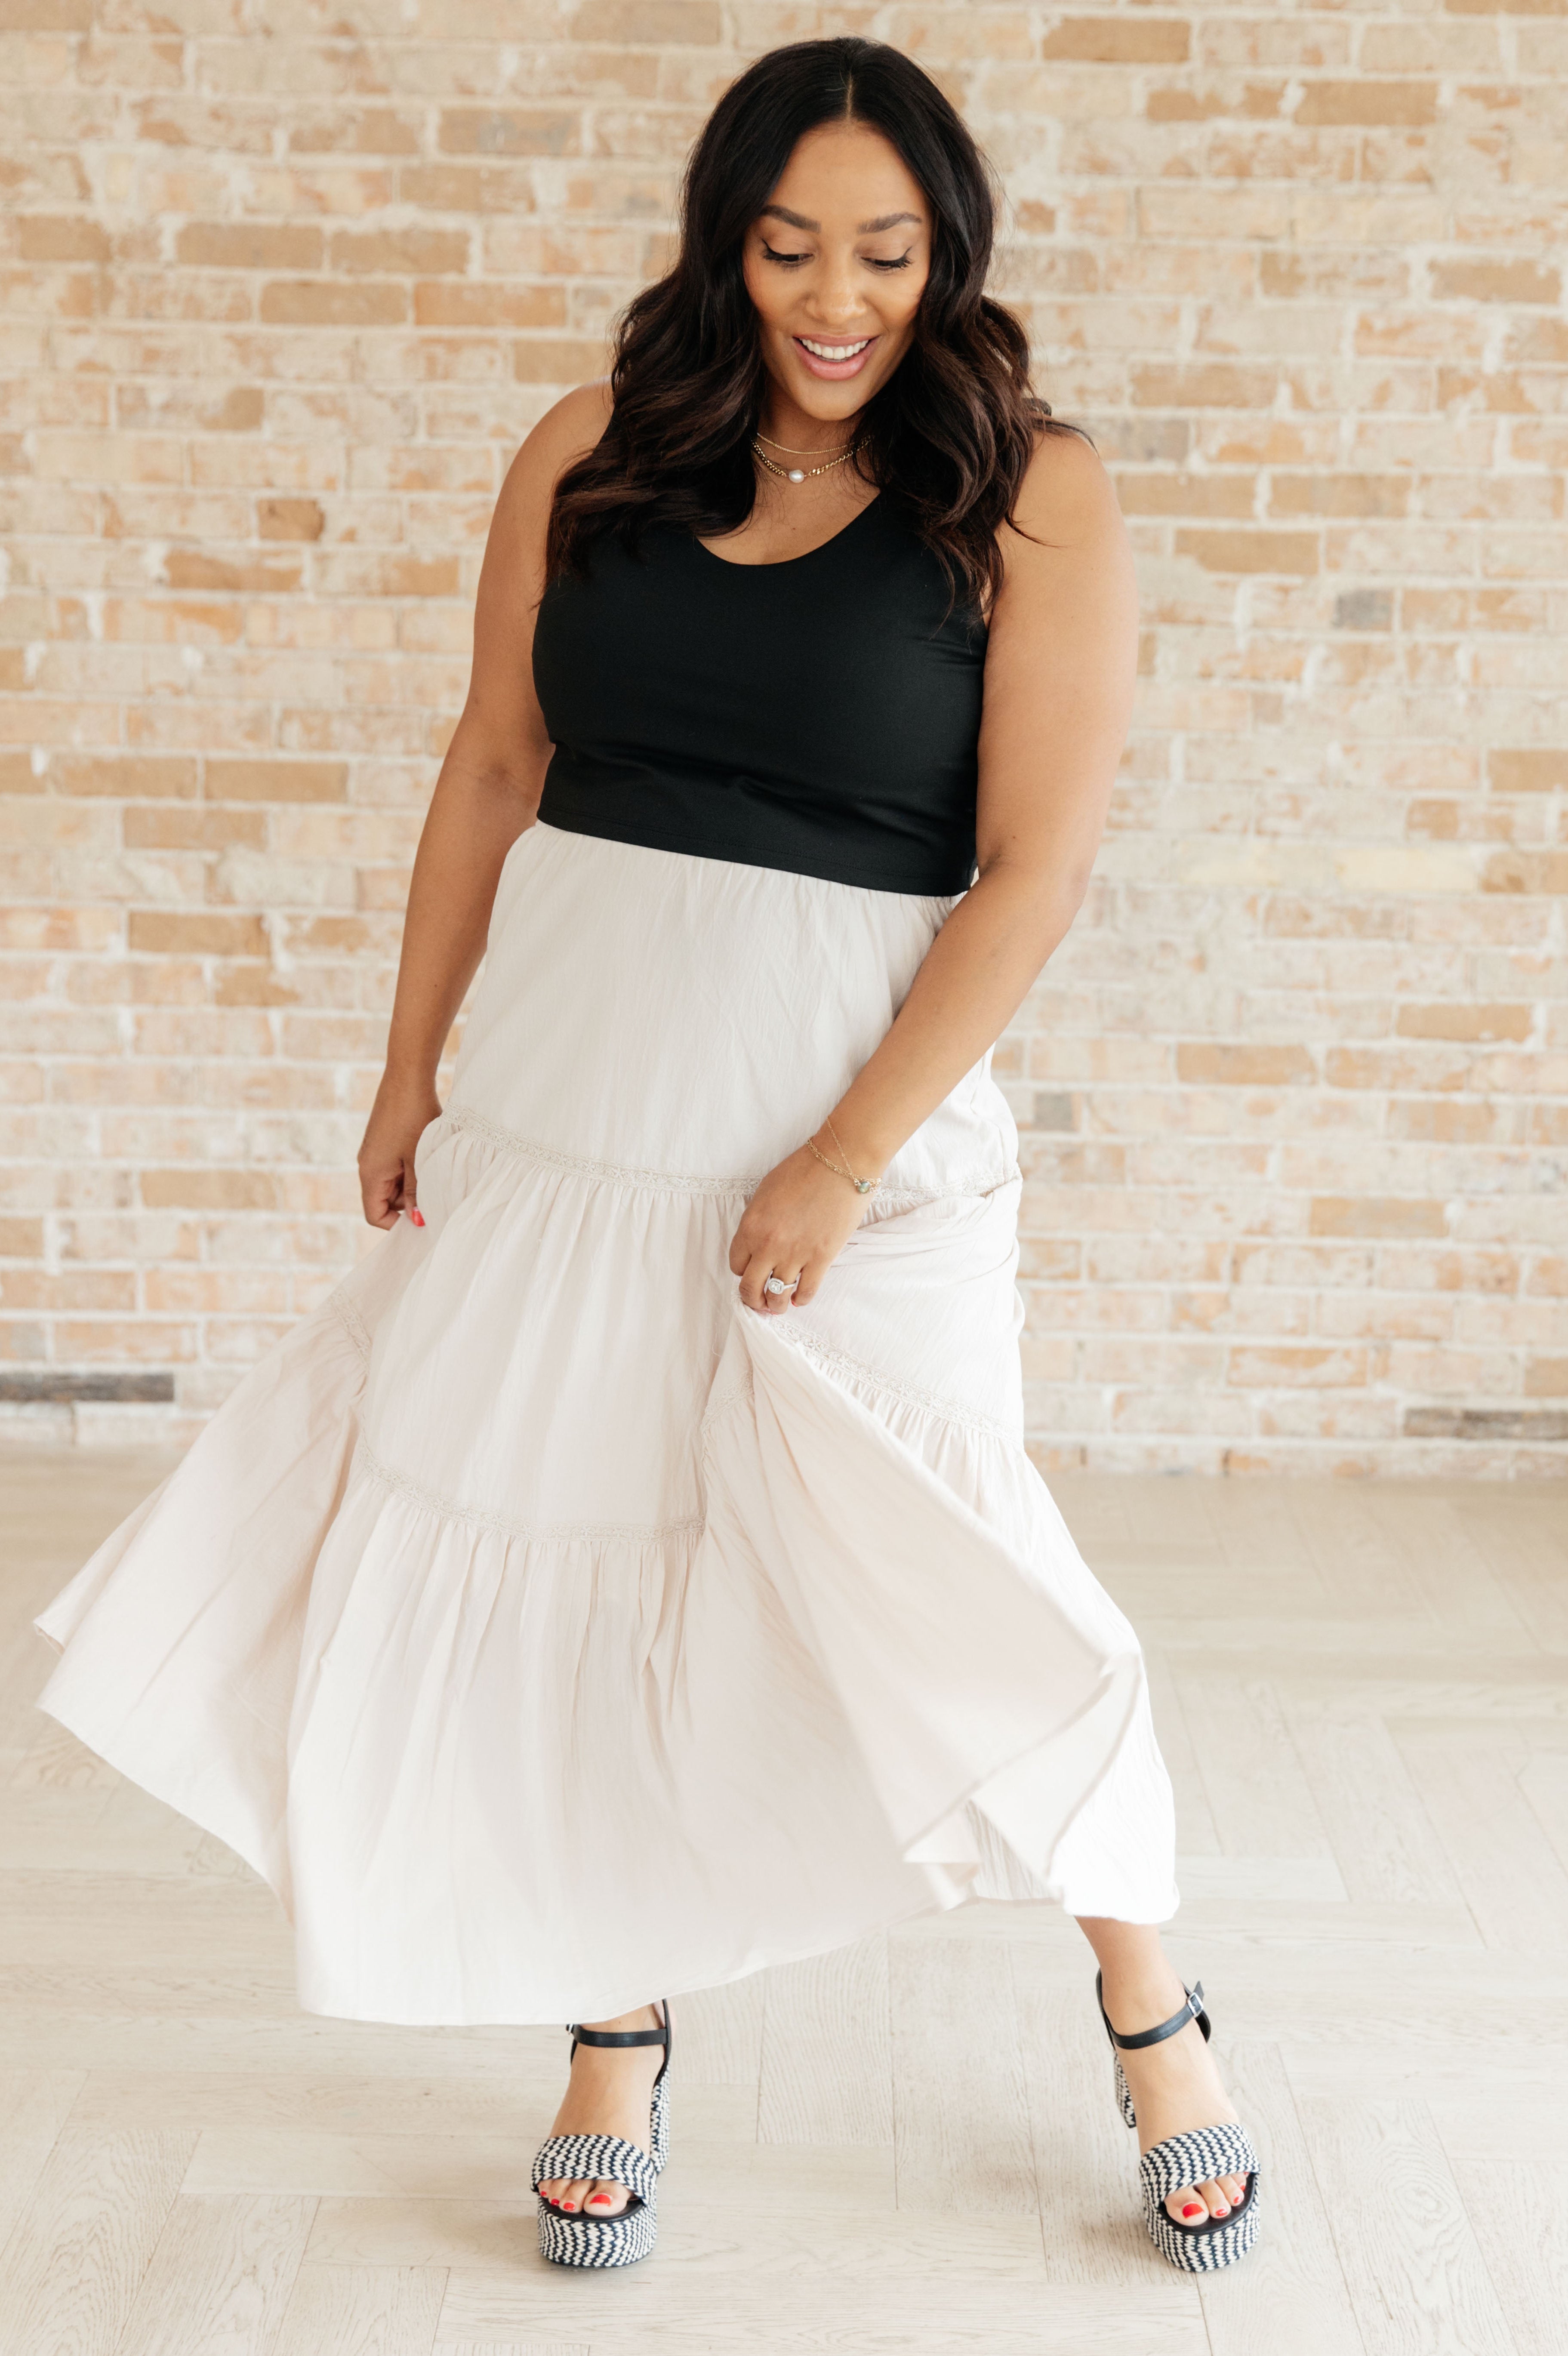 Let It Begin Tiered Maxi Skirt Ave Shops